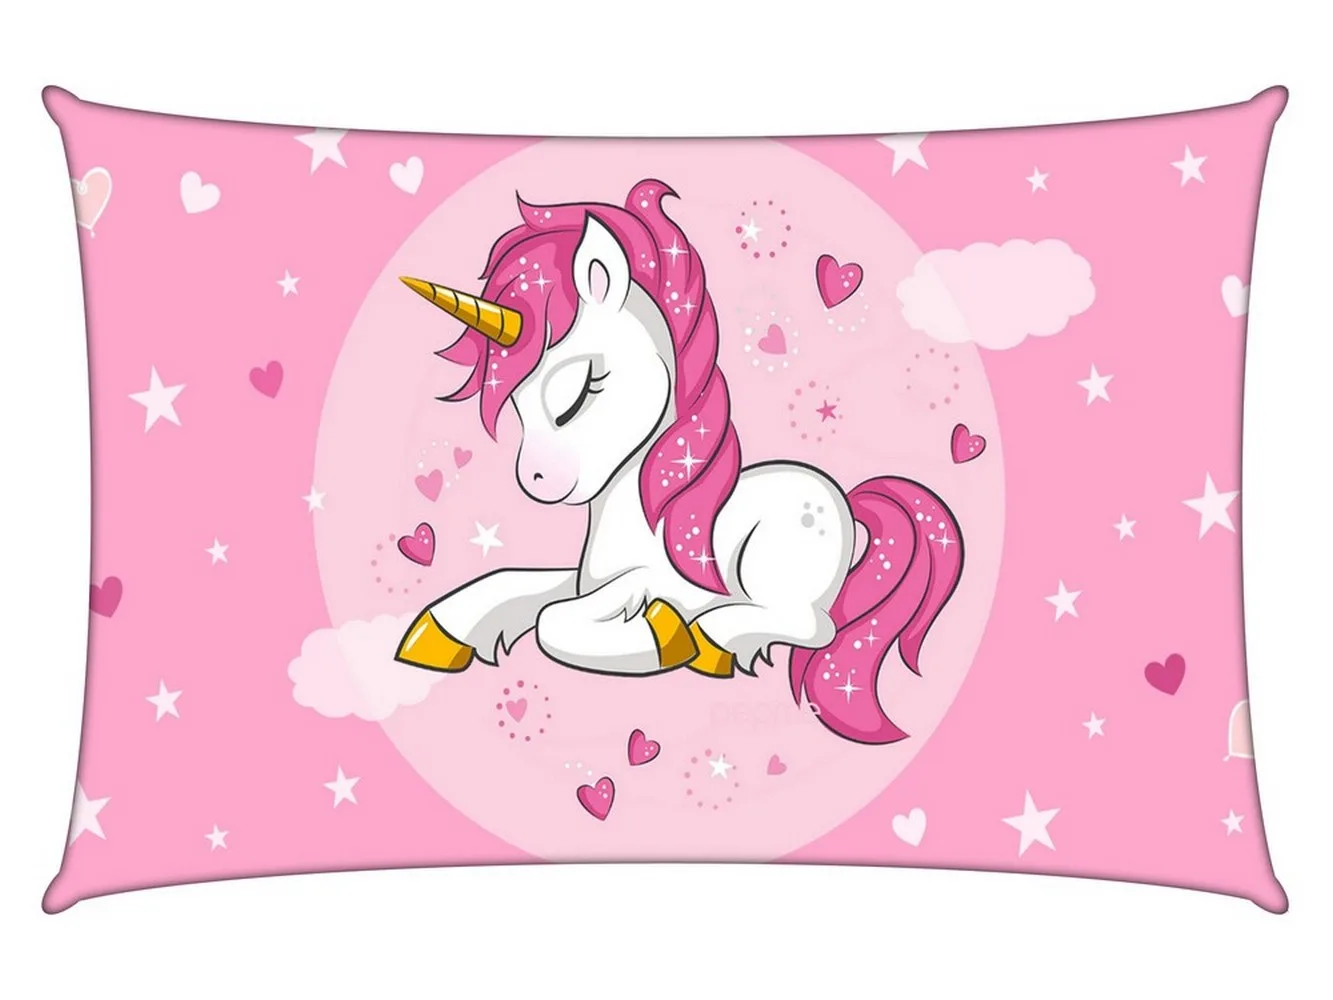 Unicorn Pillow Cover, Pink, 18x12 Inches